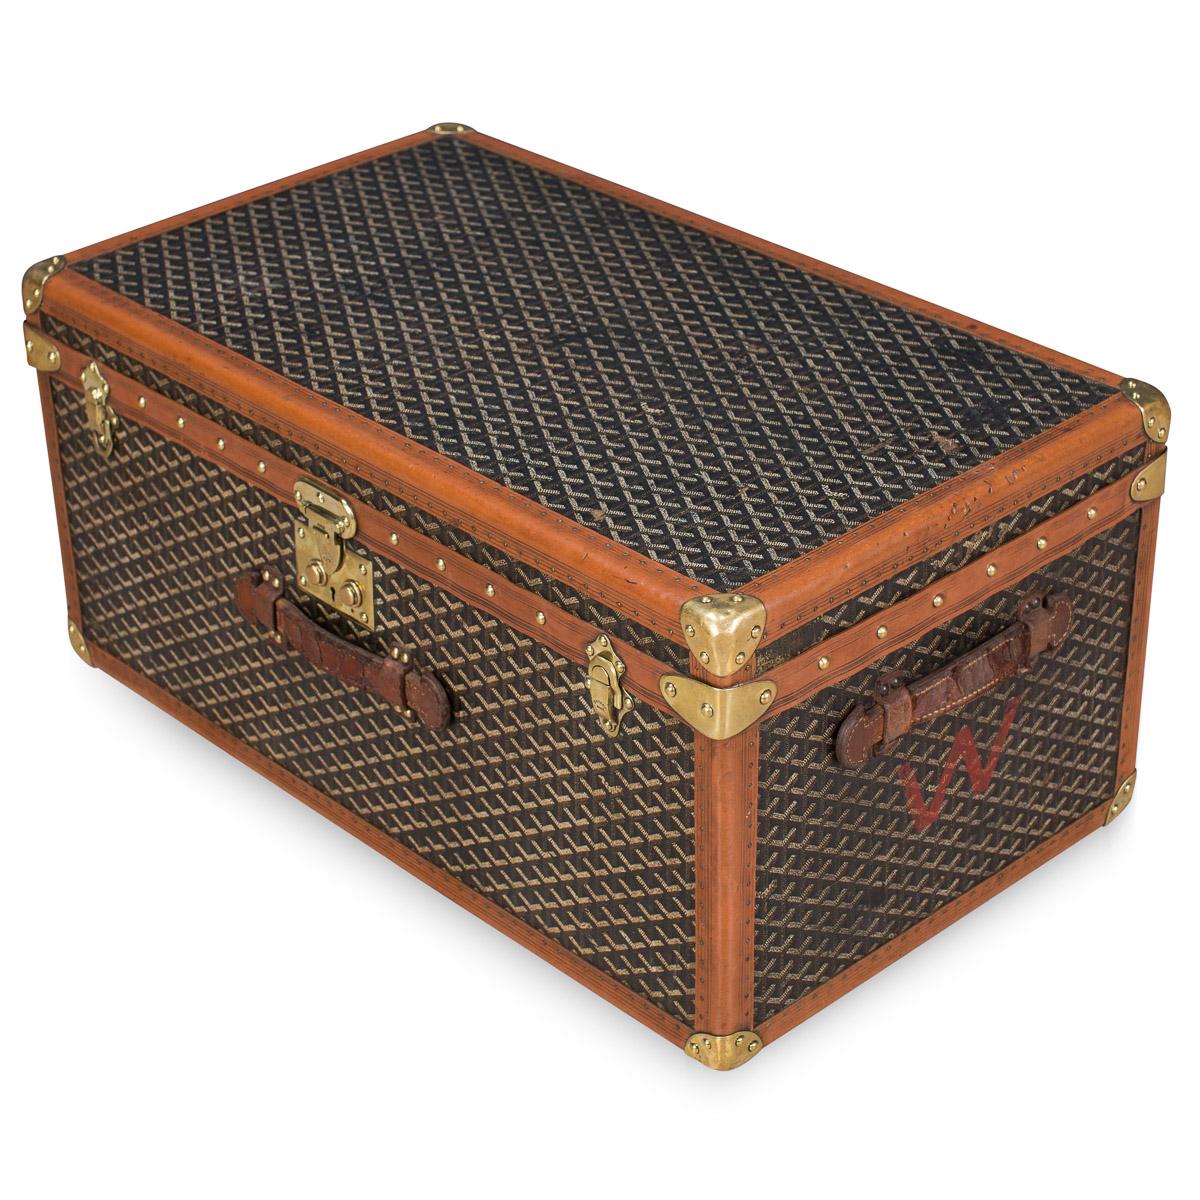 A small and delightful Goyard trunk dating to the early part of the 20th century, circa 1900-1910. Over recent years the brand has been relaunched and has taken the world of fashion by storm. The original E. Goyard firm was a trunk maker which